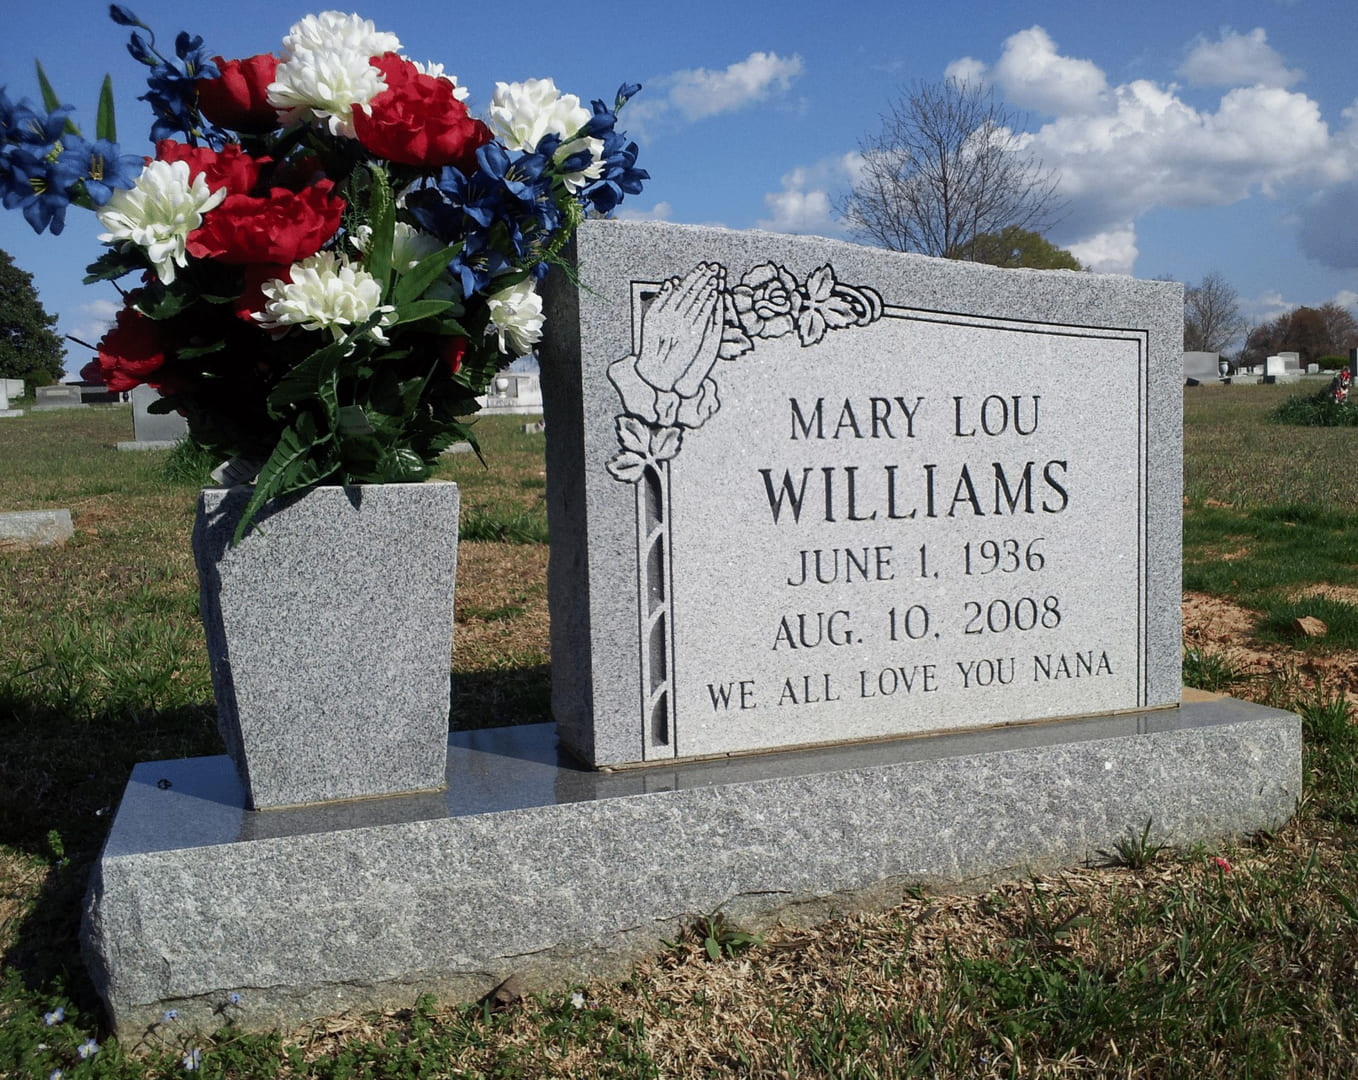 Mary Lou Williams Memorial Block With Vase